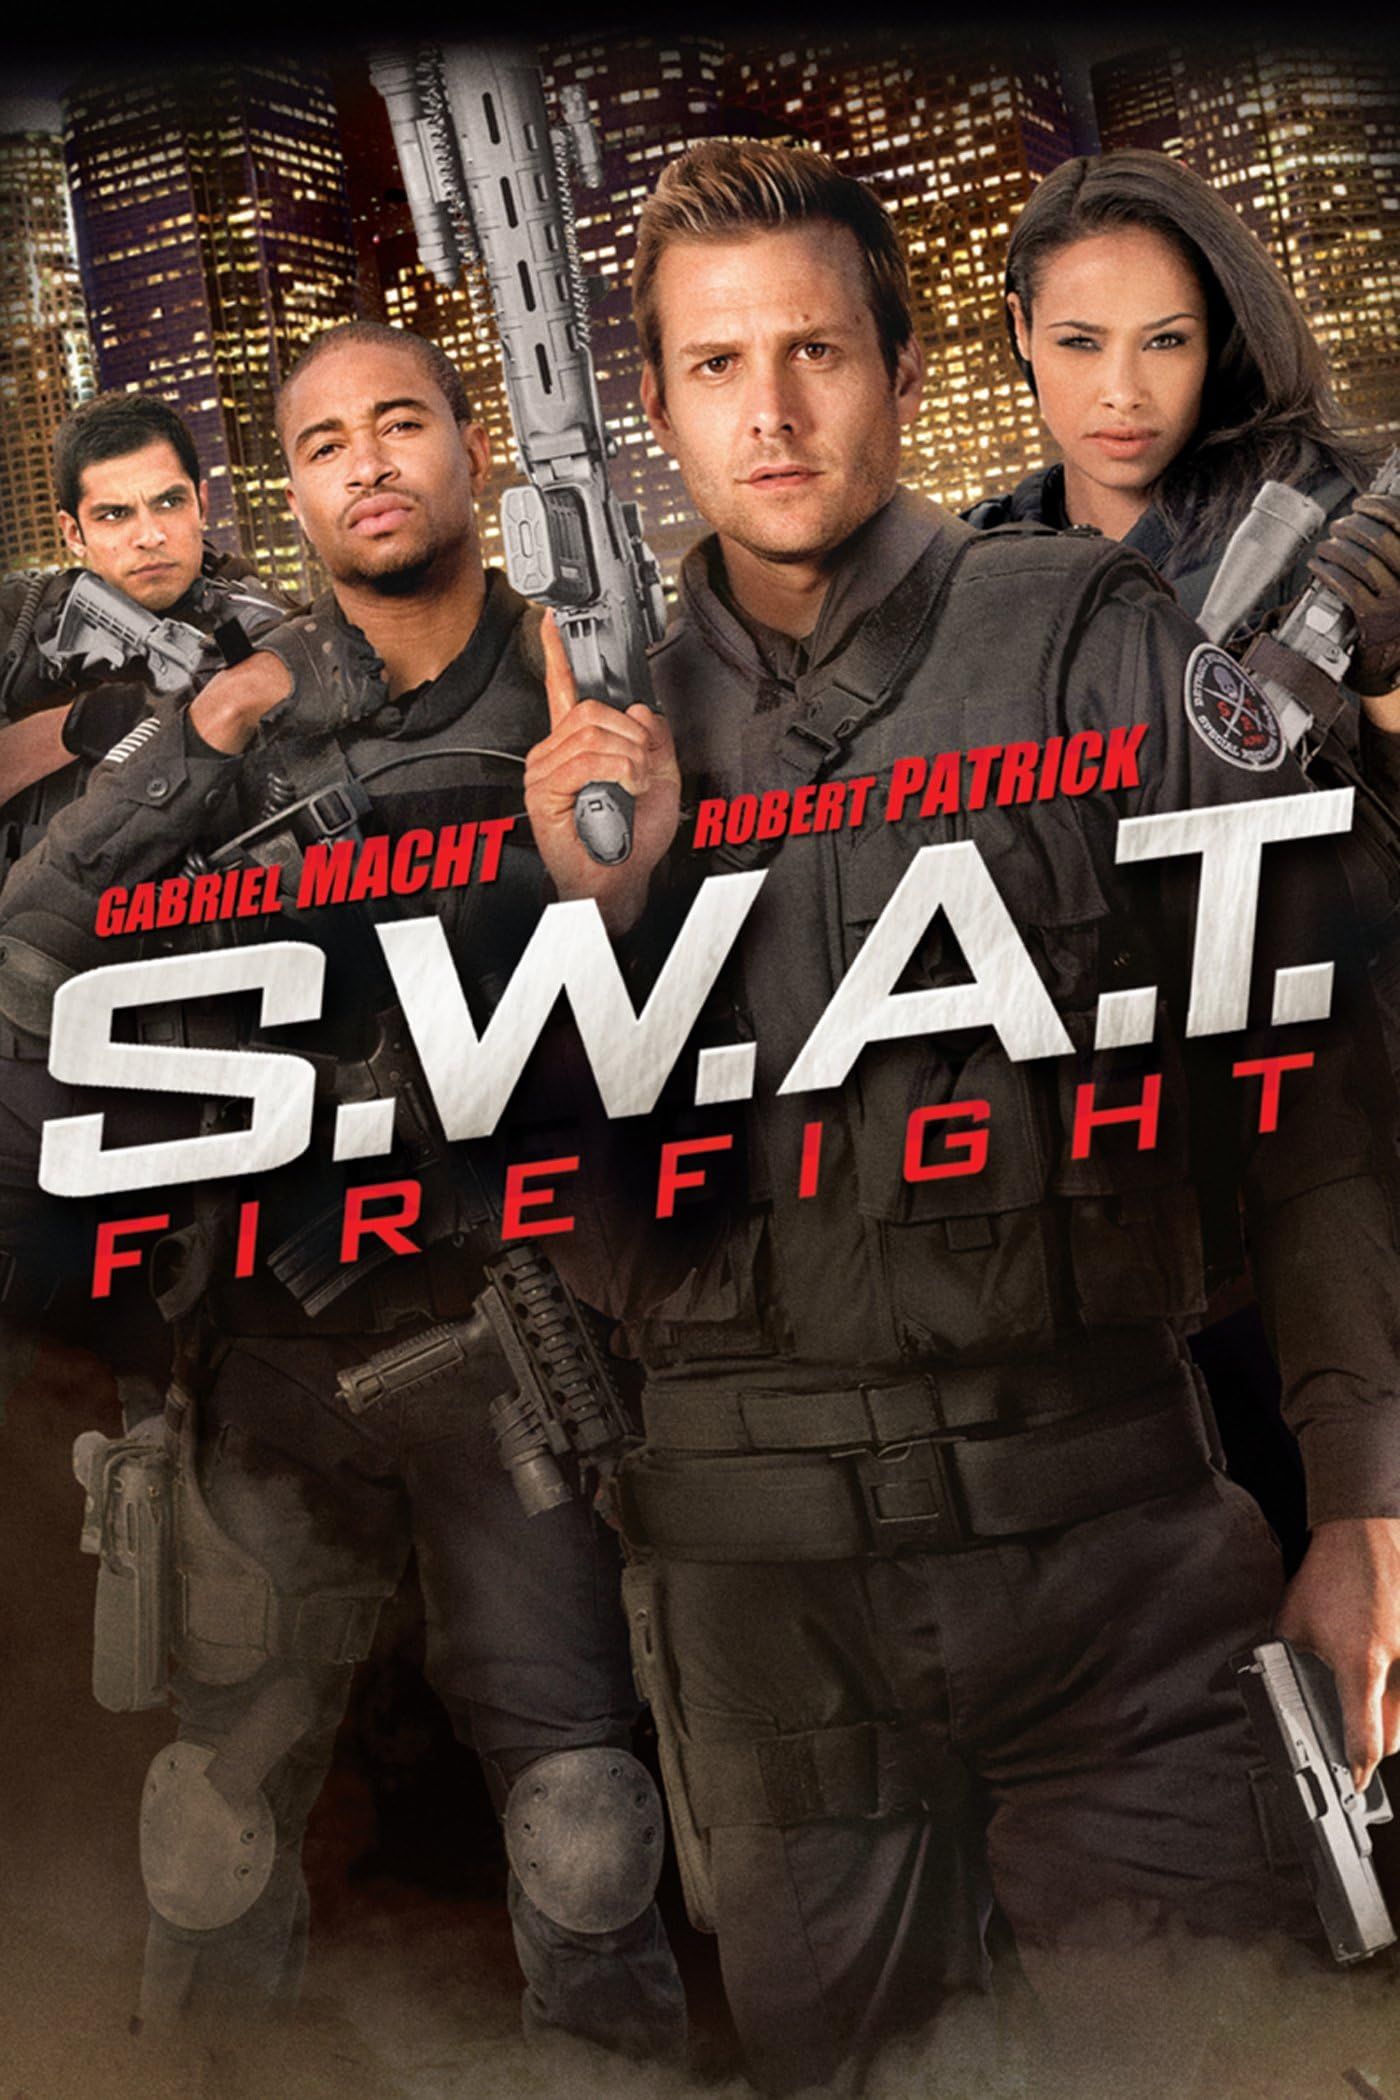 SWAT Firefight (2011) Hindi Dubbed NF HDRip download full movie